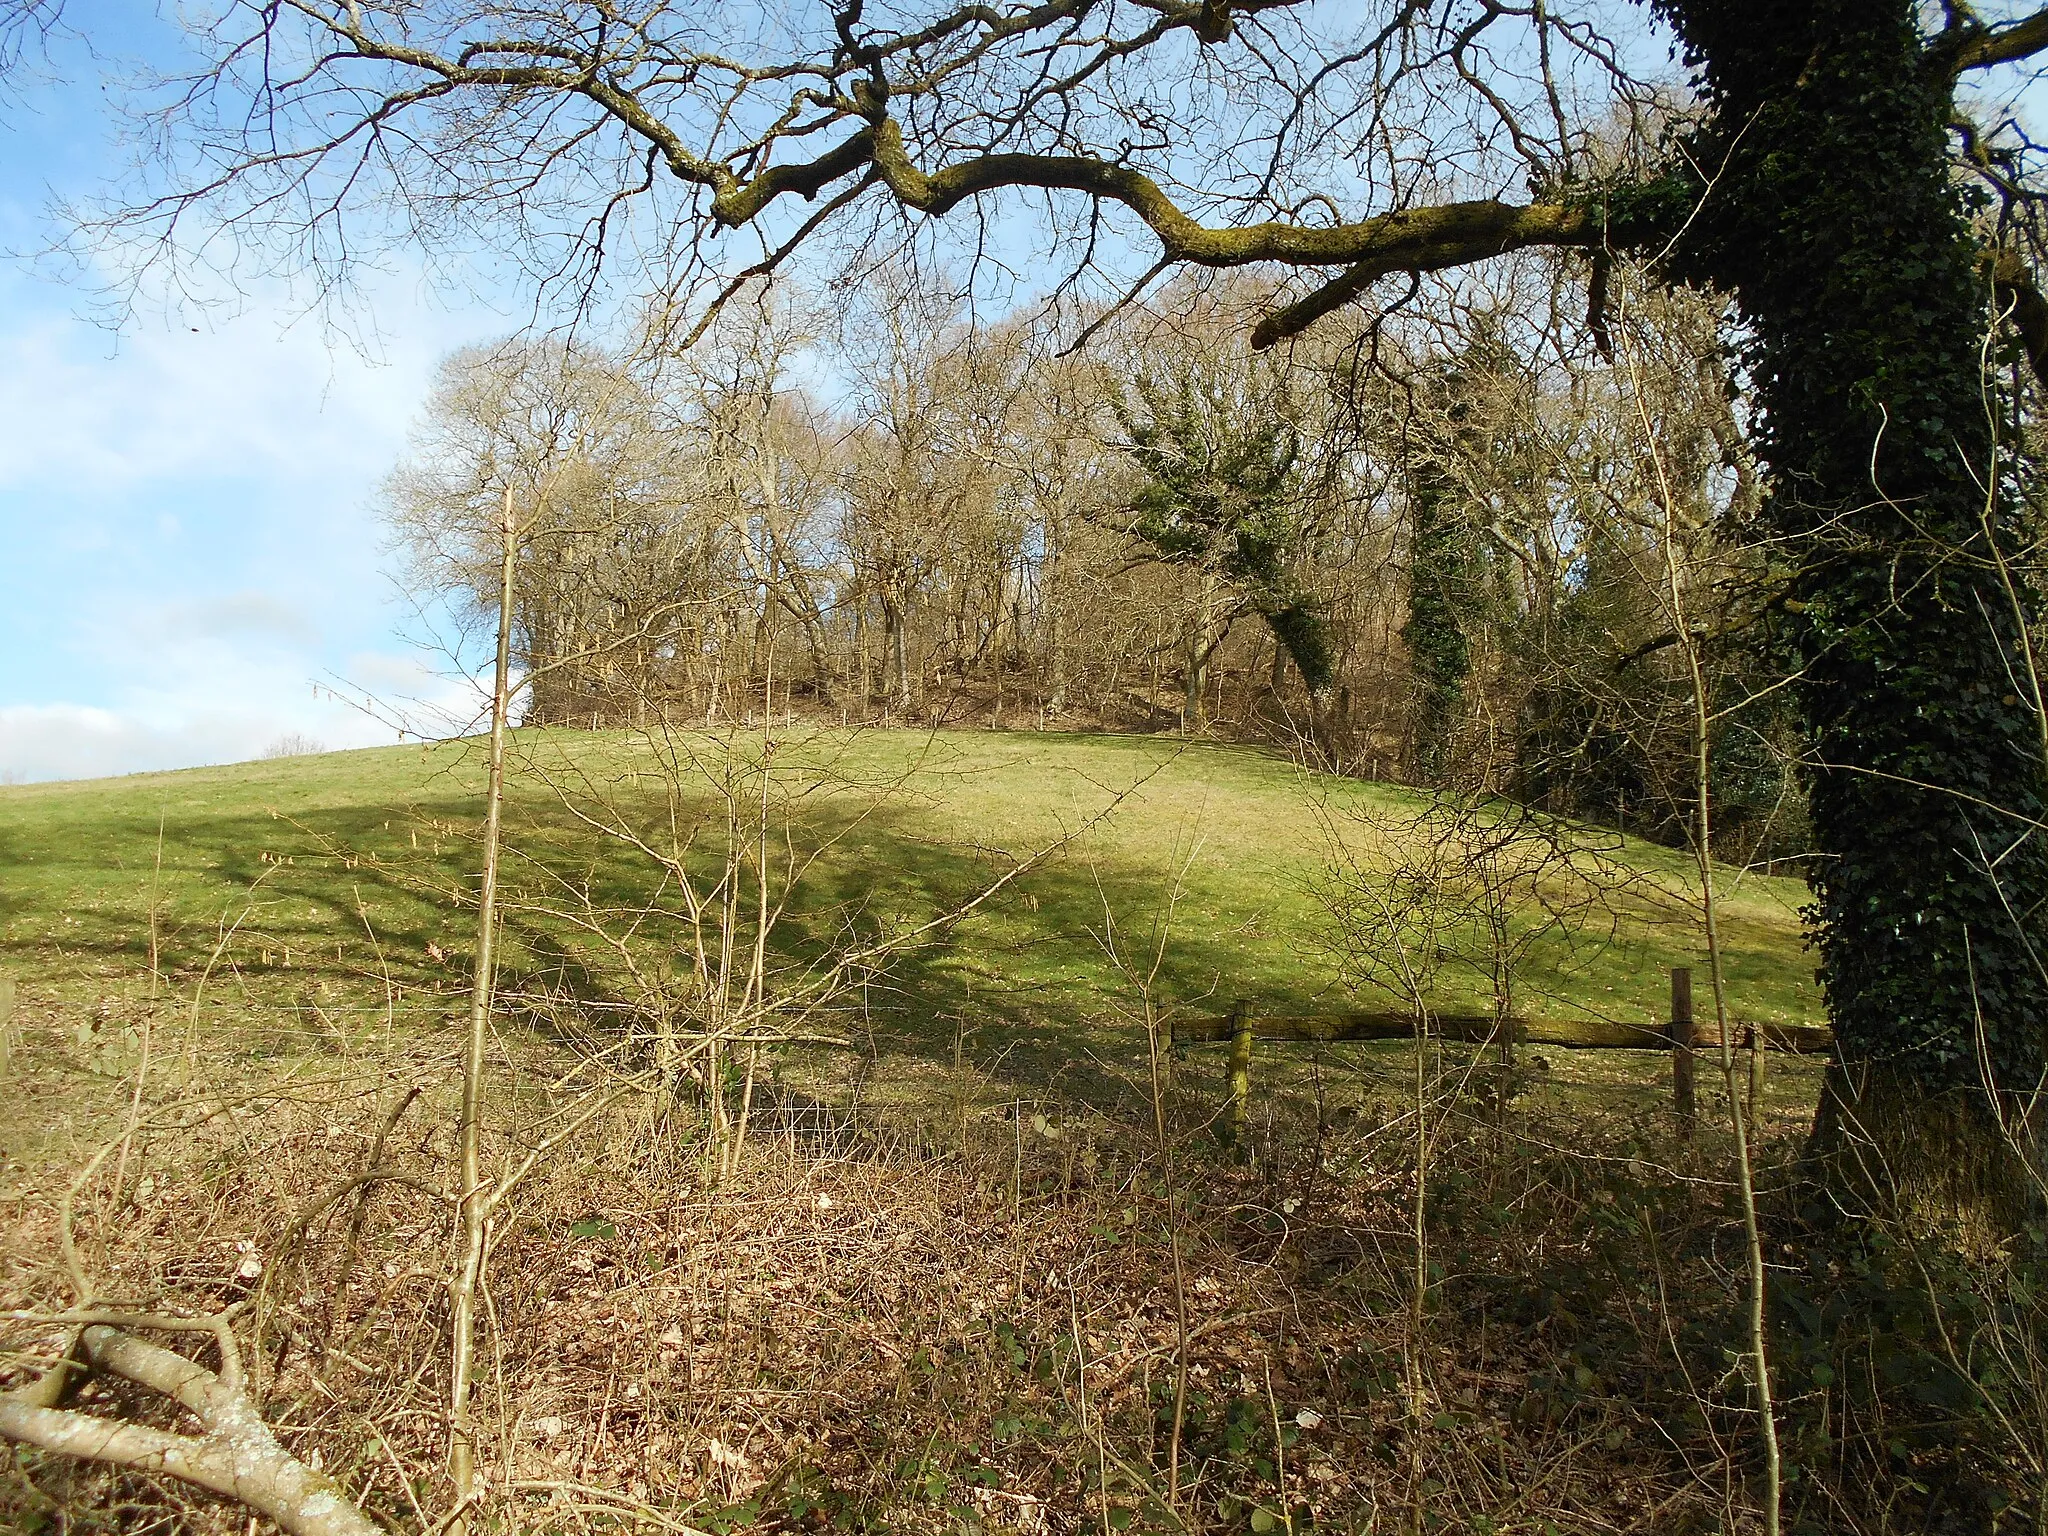 Photo showing: King John's Hill, in Worldham Parish, Hampshire. The hill was an Iron Age hillfort, with a later medieval hunting lodge attributed to King John.